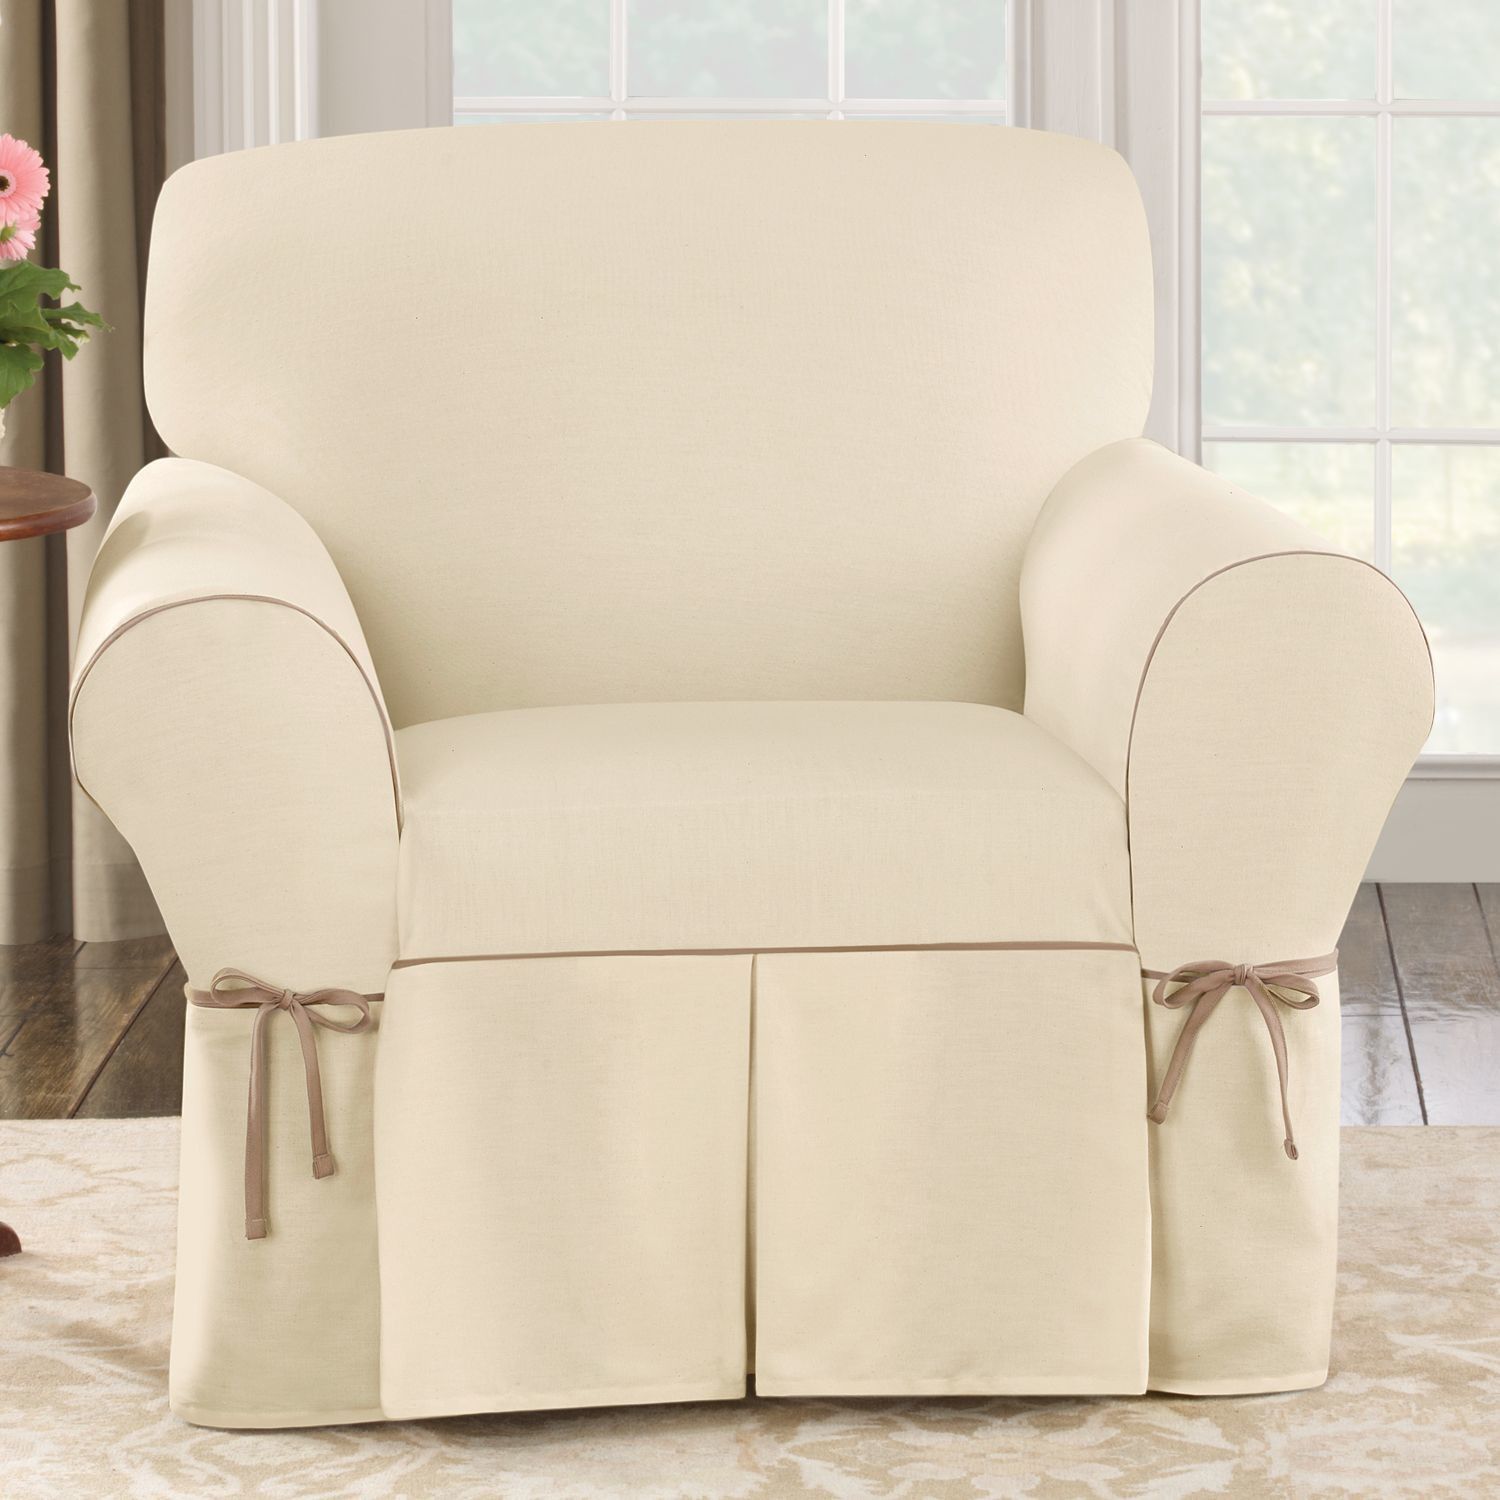 Slip Covers For Chairs Parson Chair Slipcovers For New Look How With Regard To Sofa And Chair Slipcovers (View 8 of 15)